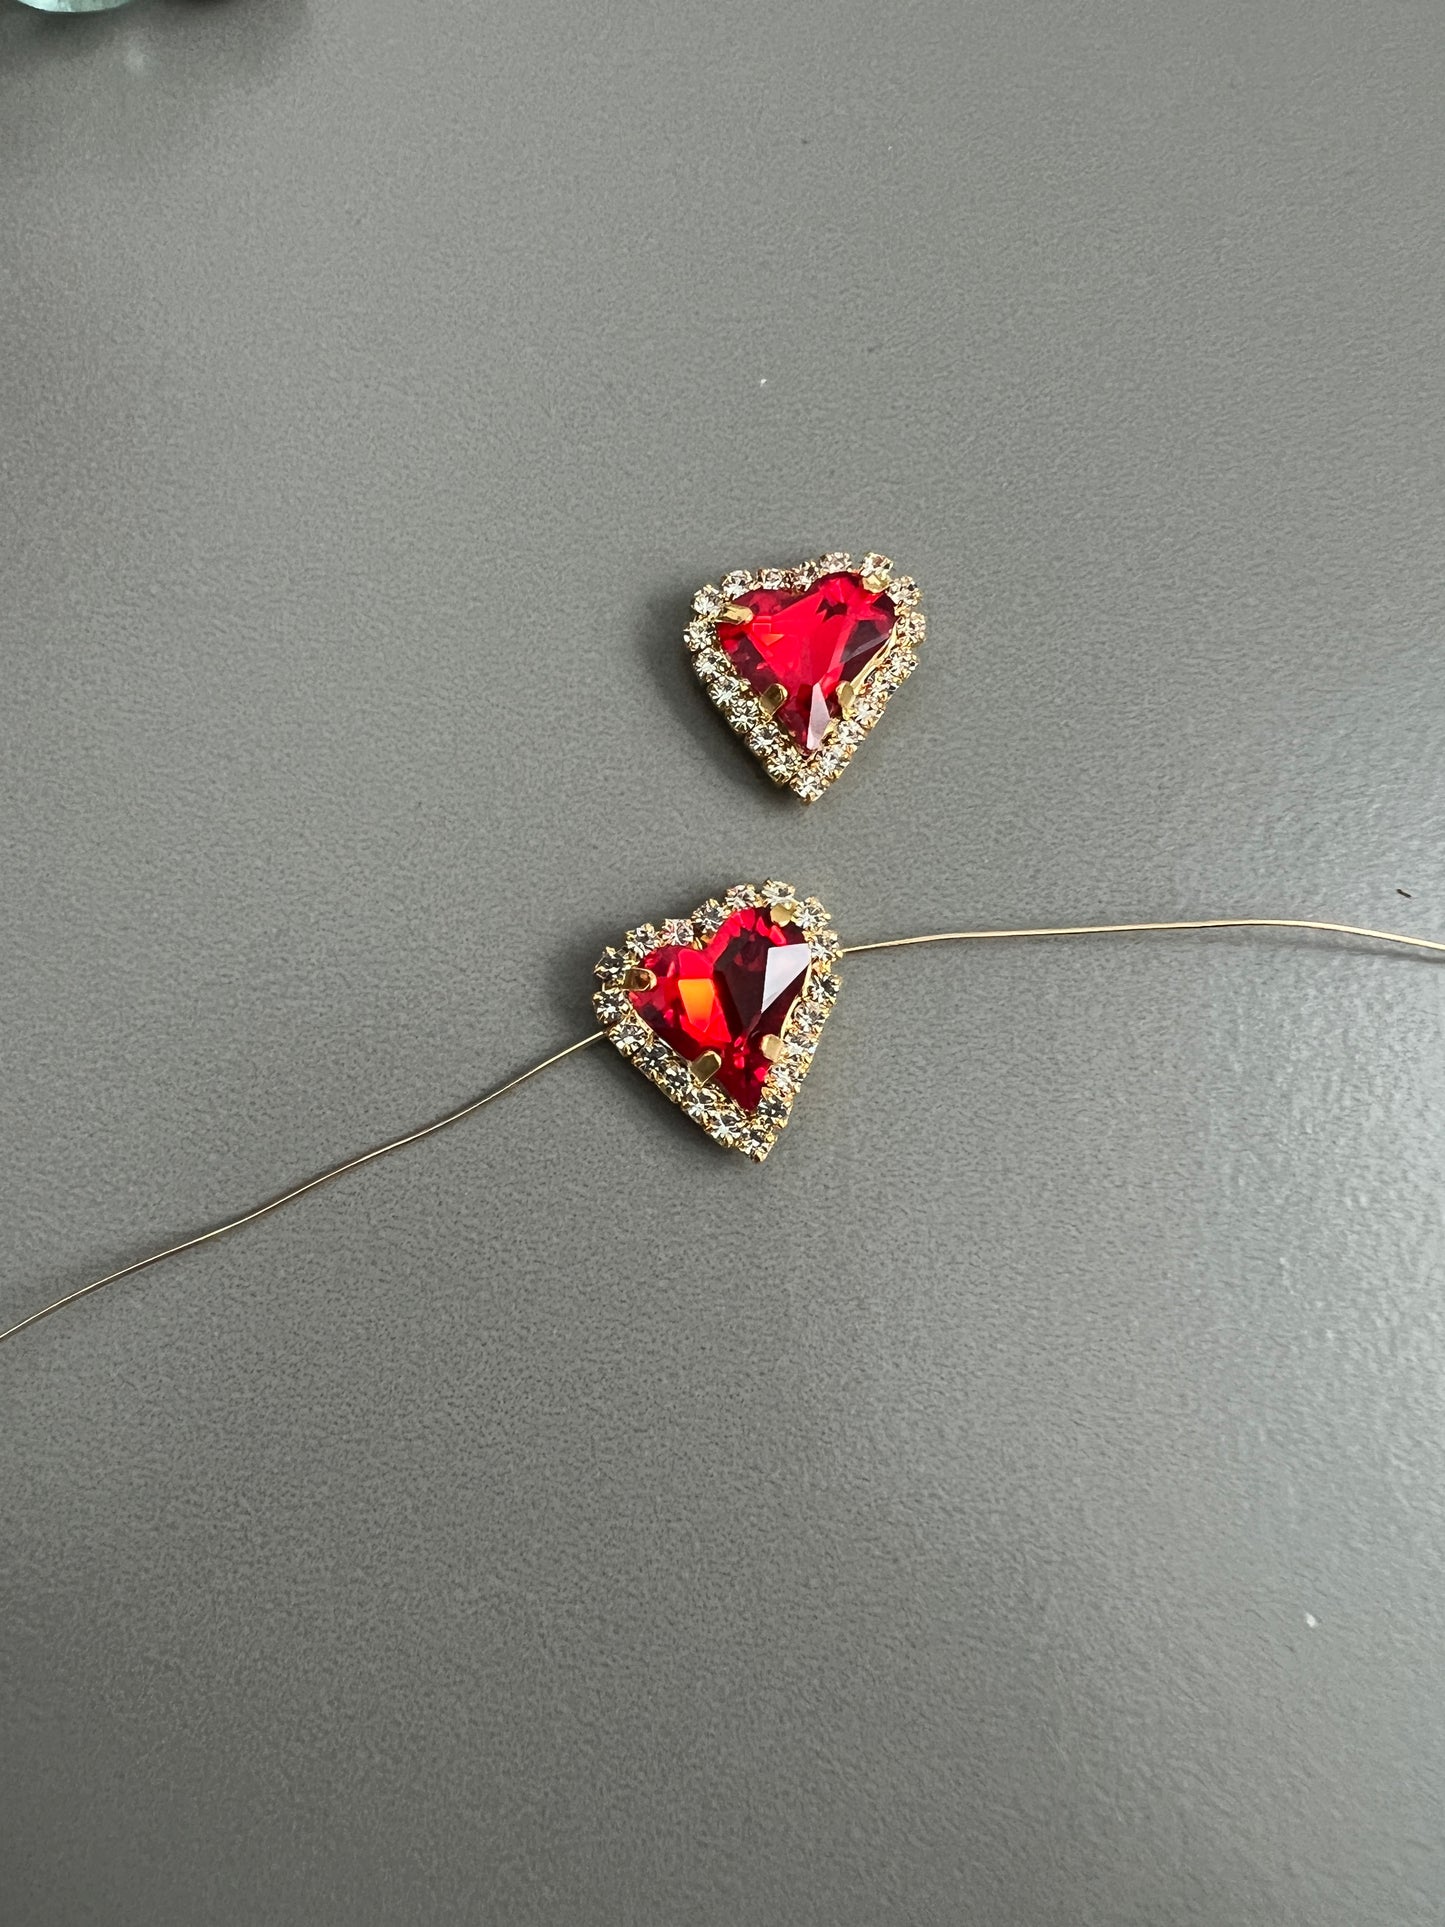 12x13mm heart charm/spacer